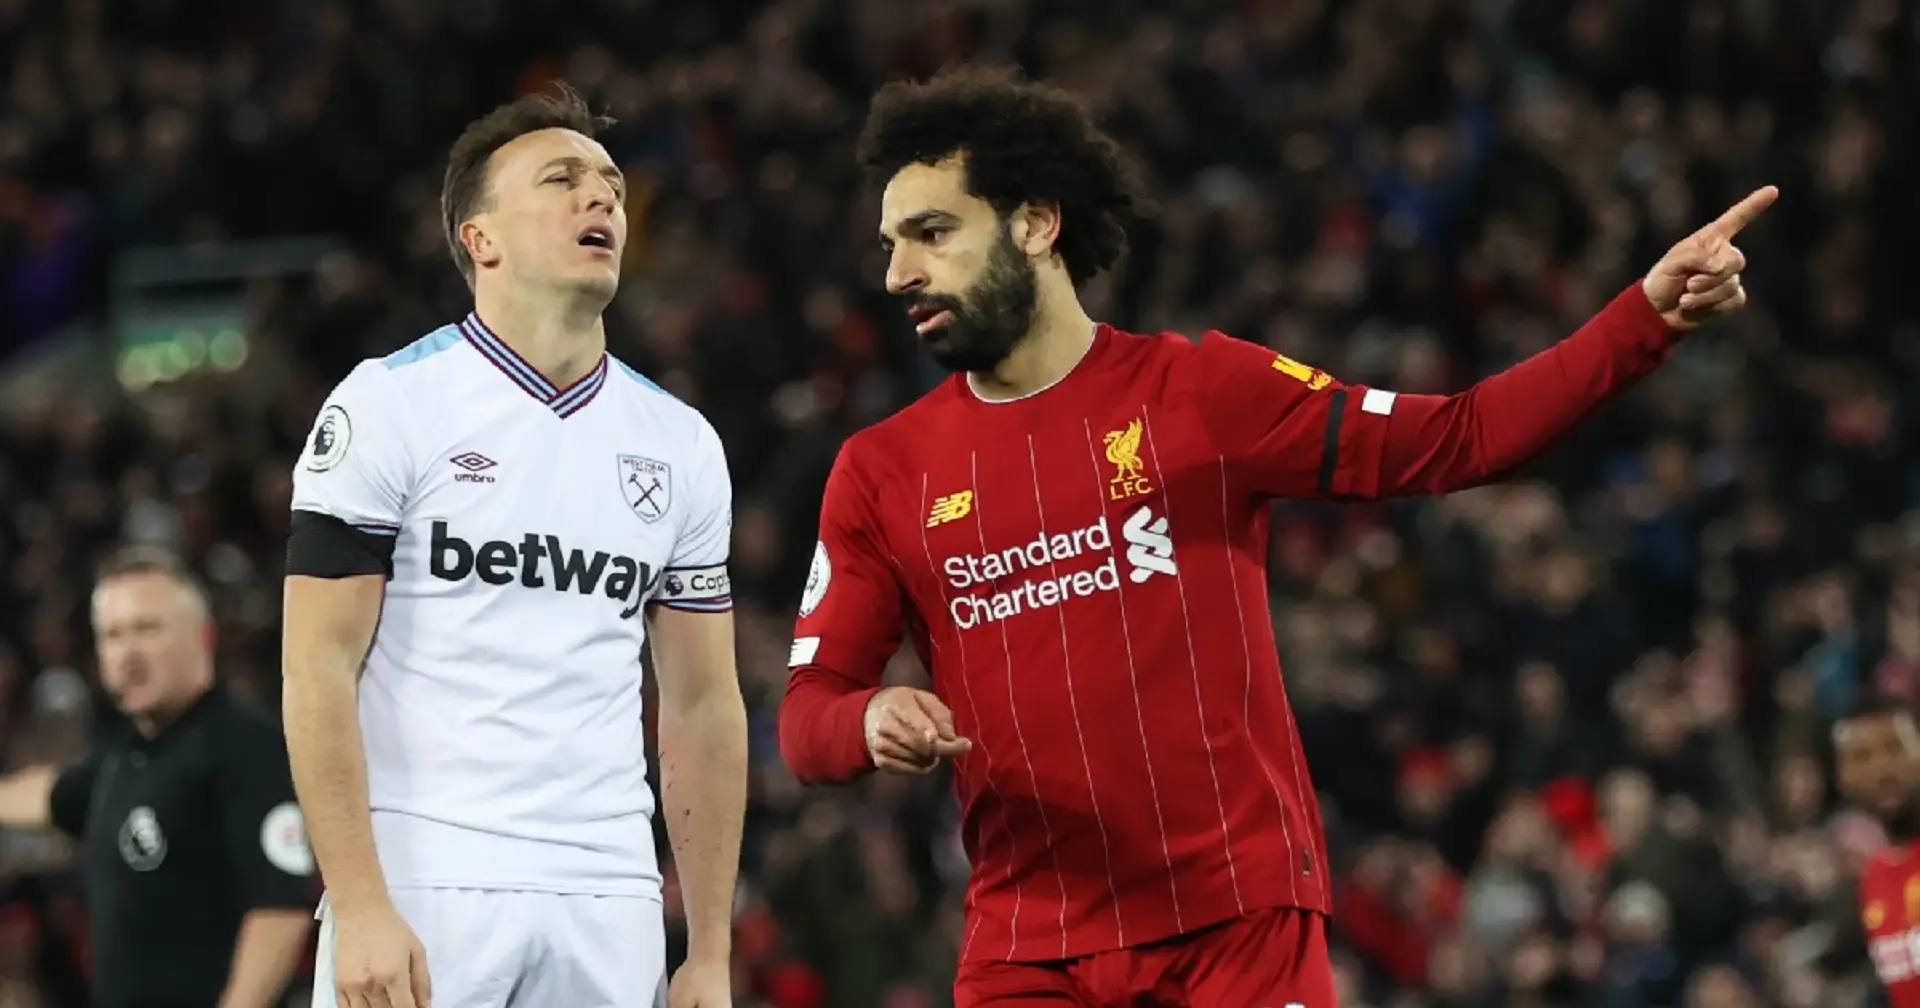 West Ham vs Liverpool: Team news, probable line-ups, score predictions, and more - preview